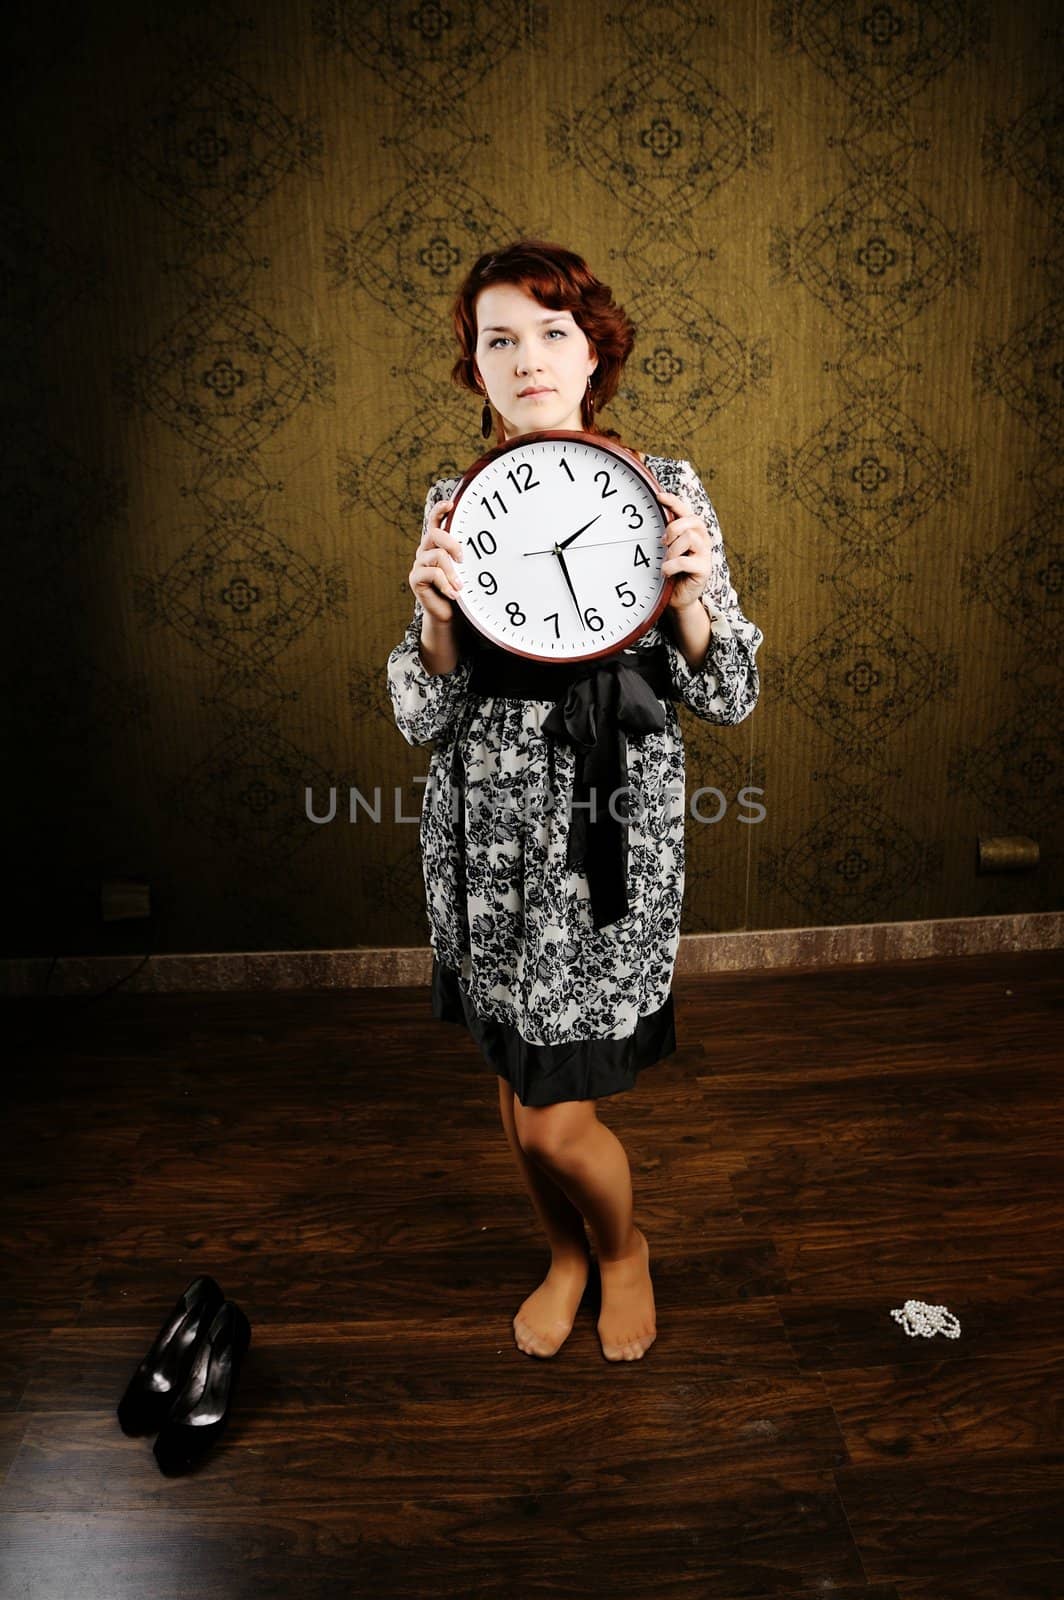 An image of a woman with a clock